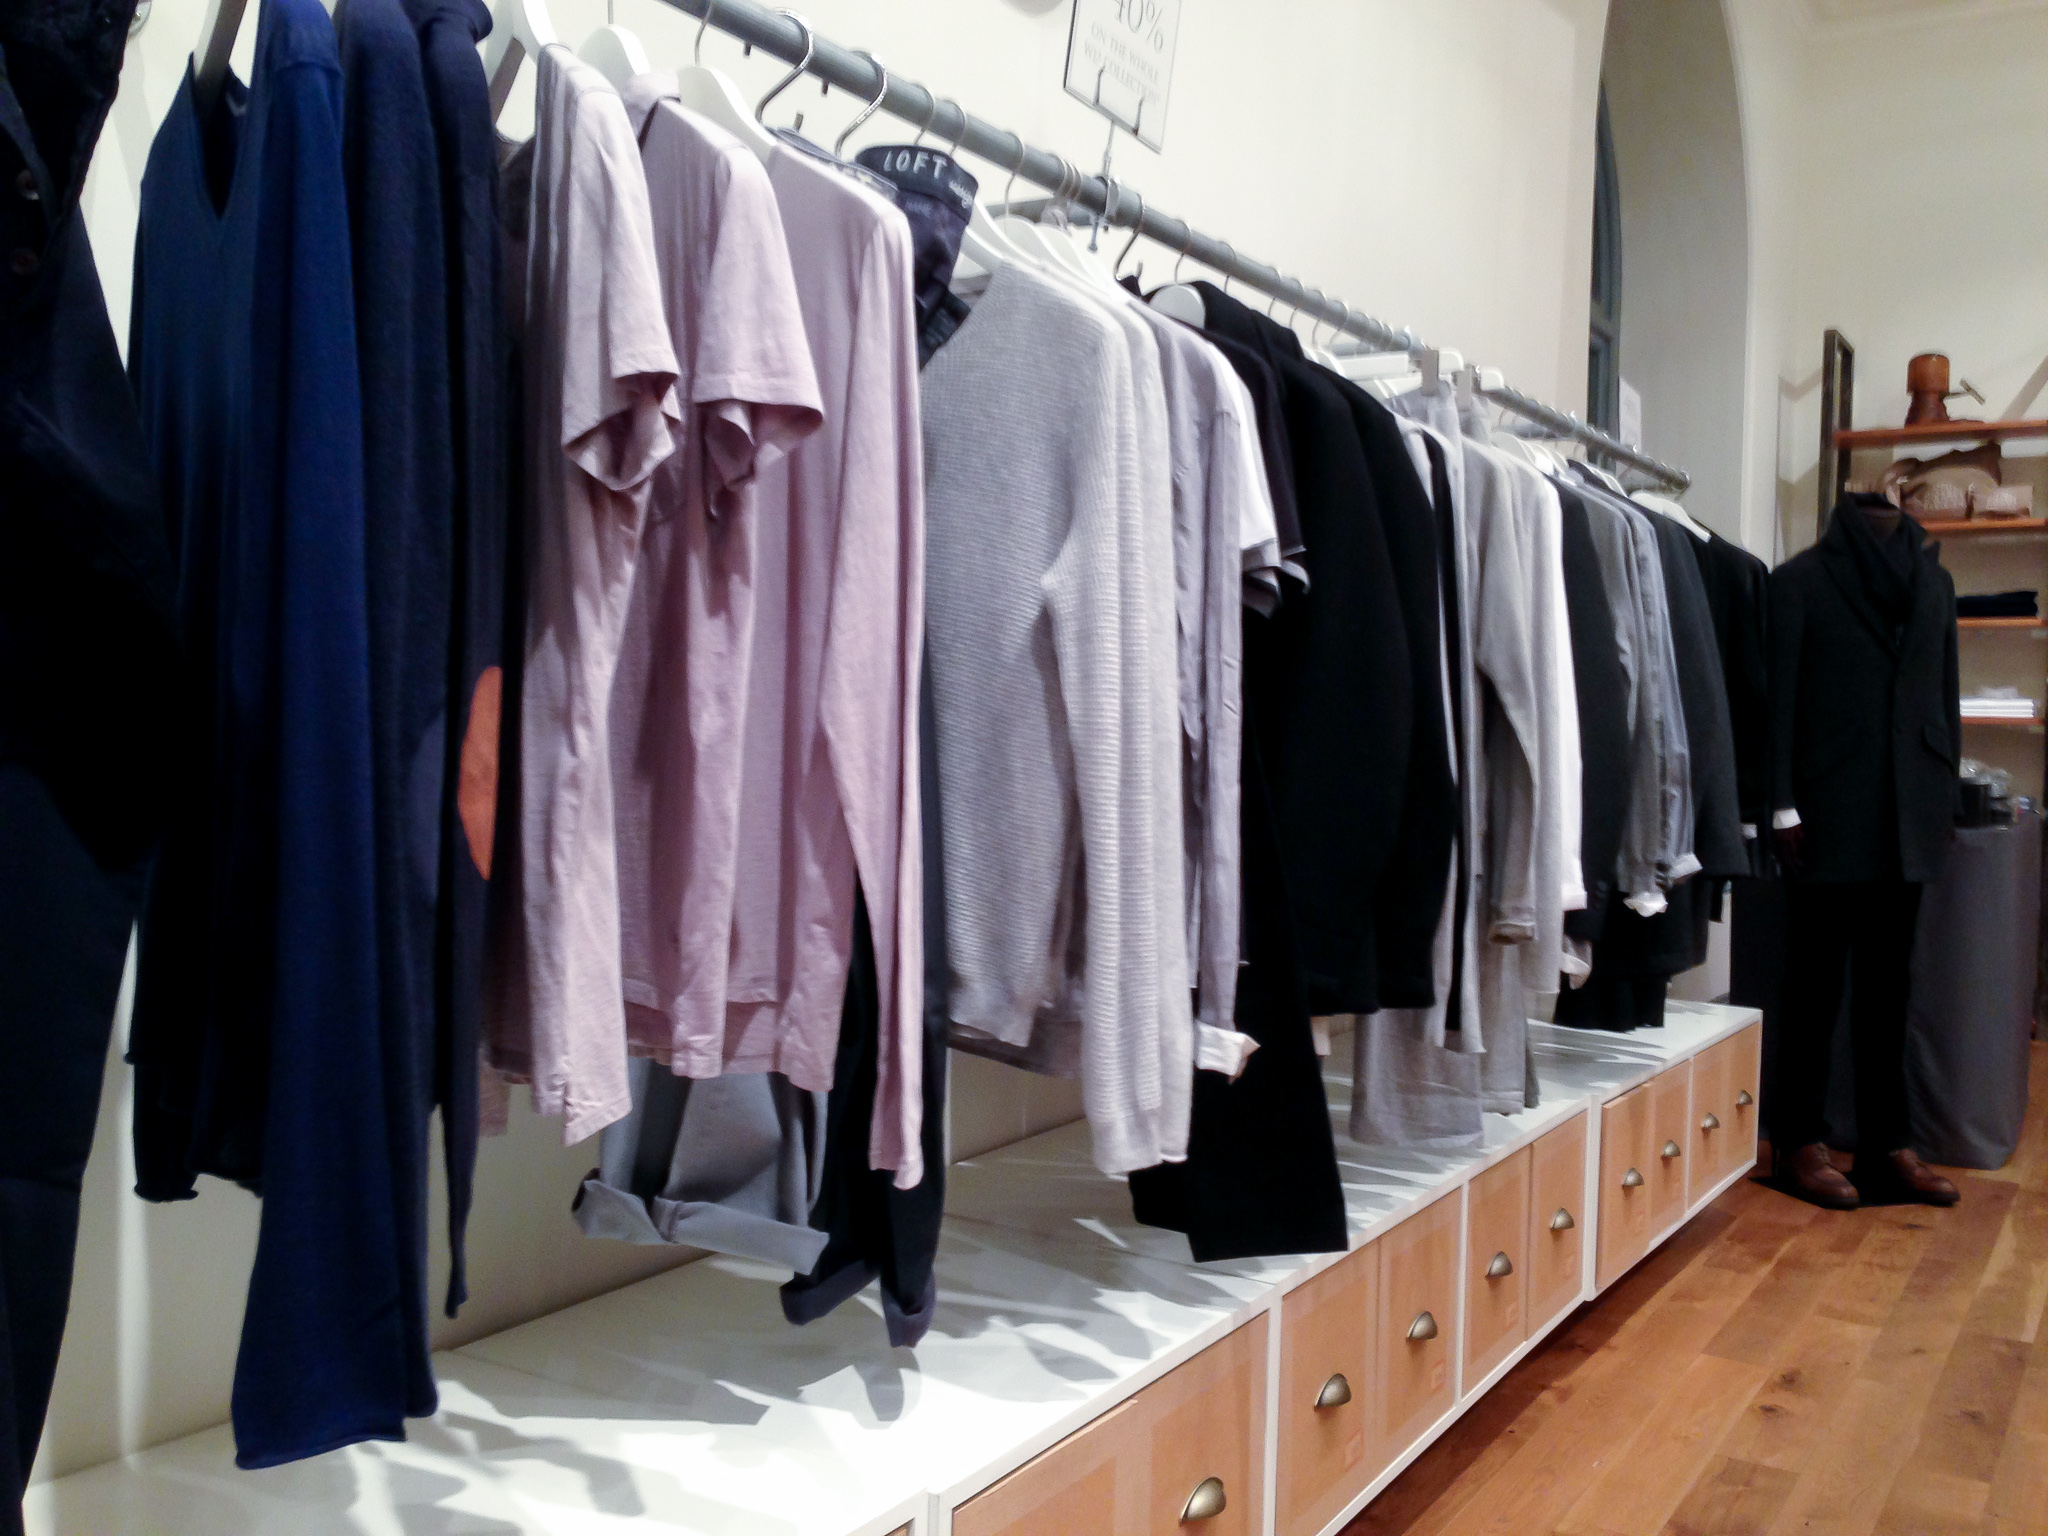 Womenswear at Loft Design By… in London. Photo by alphacityguides.